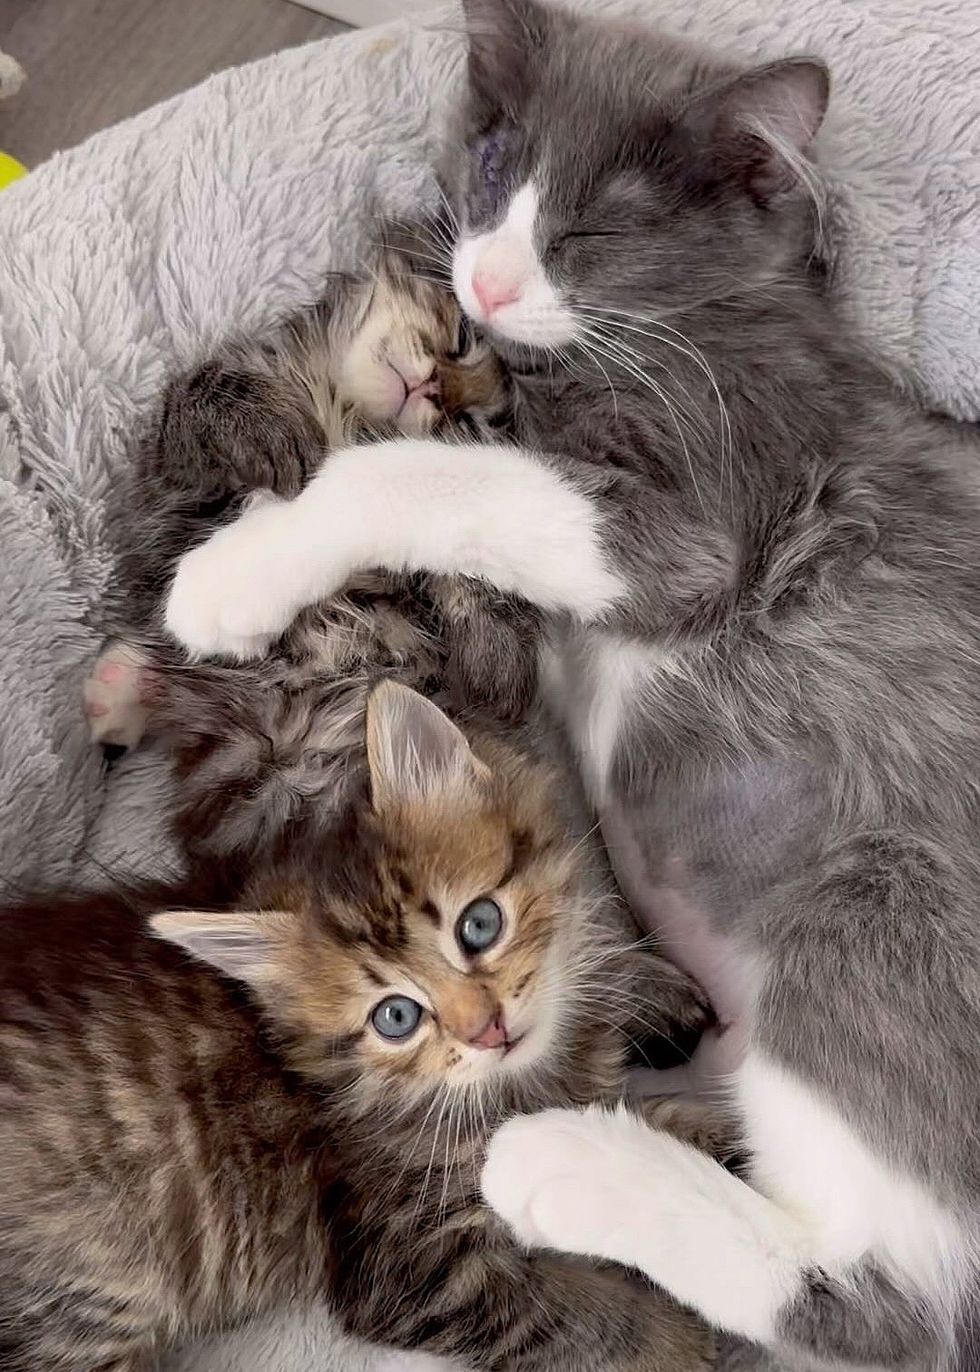 snuggle cuddle kittens cats